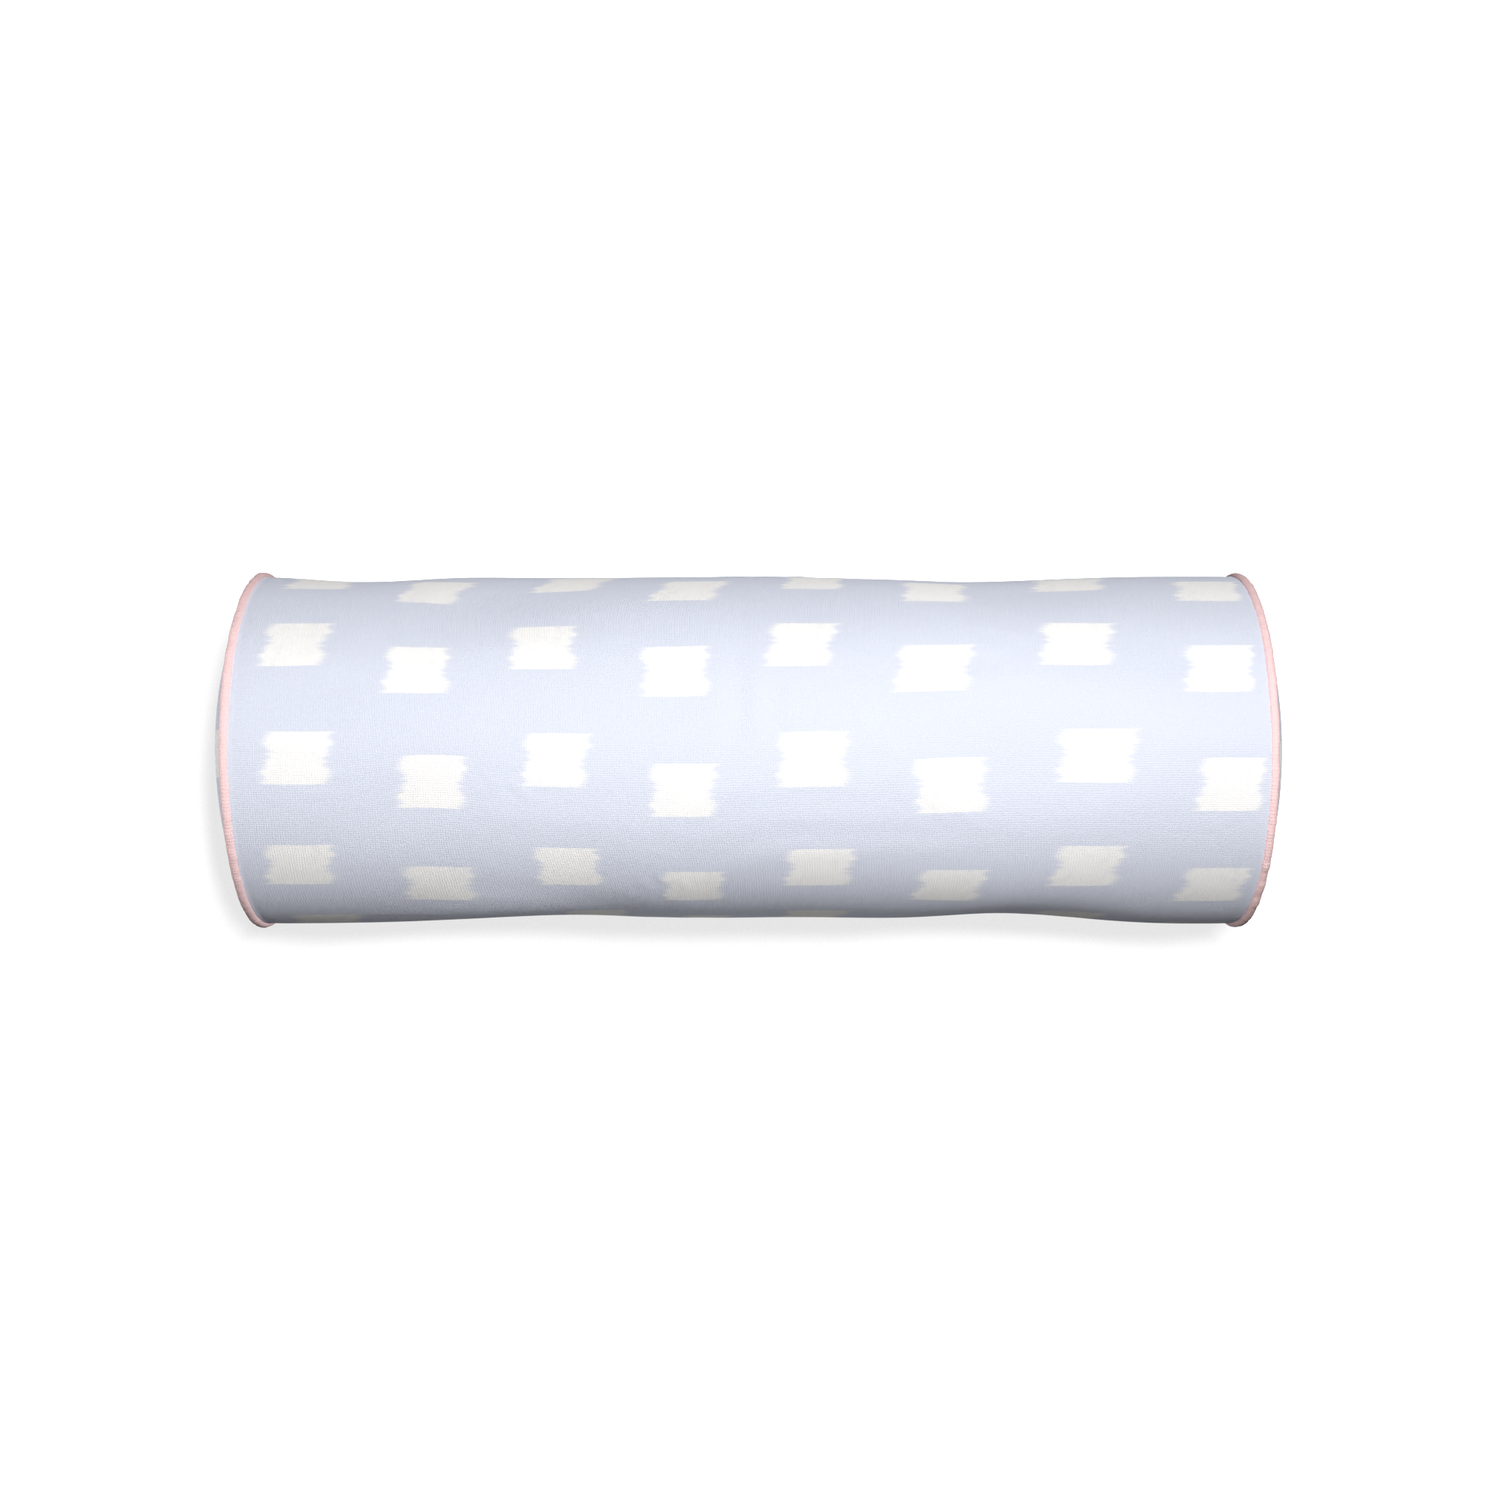 Bolster denton custom pillow with petal piping on white background